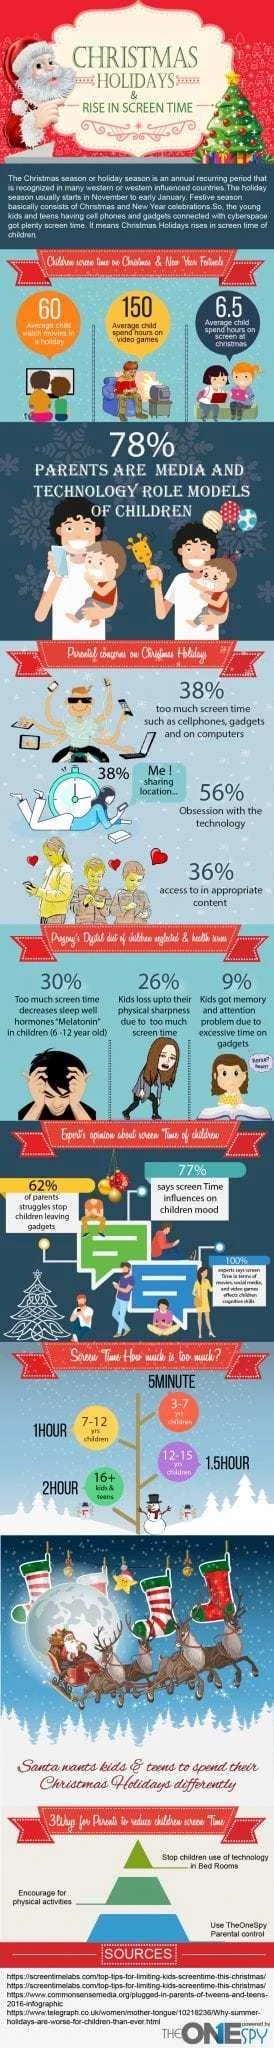 Christmas Holidays & Rise in Screen Time Infographic